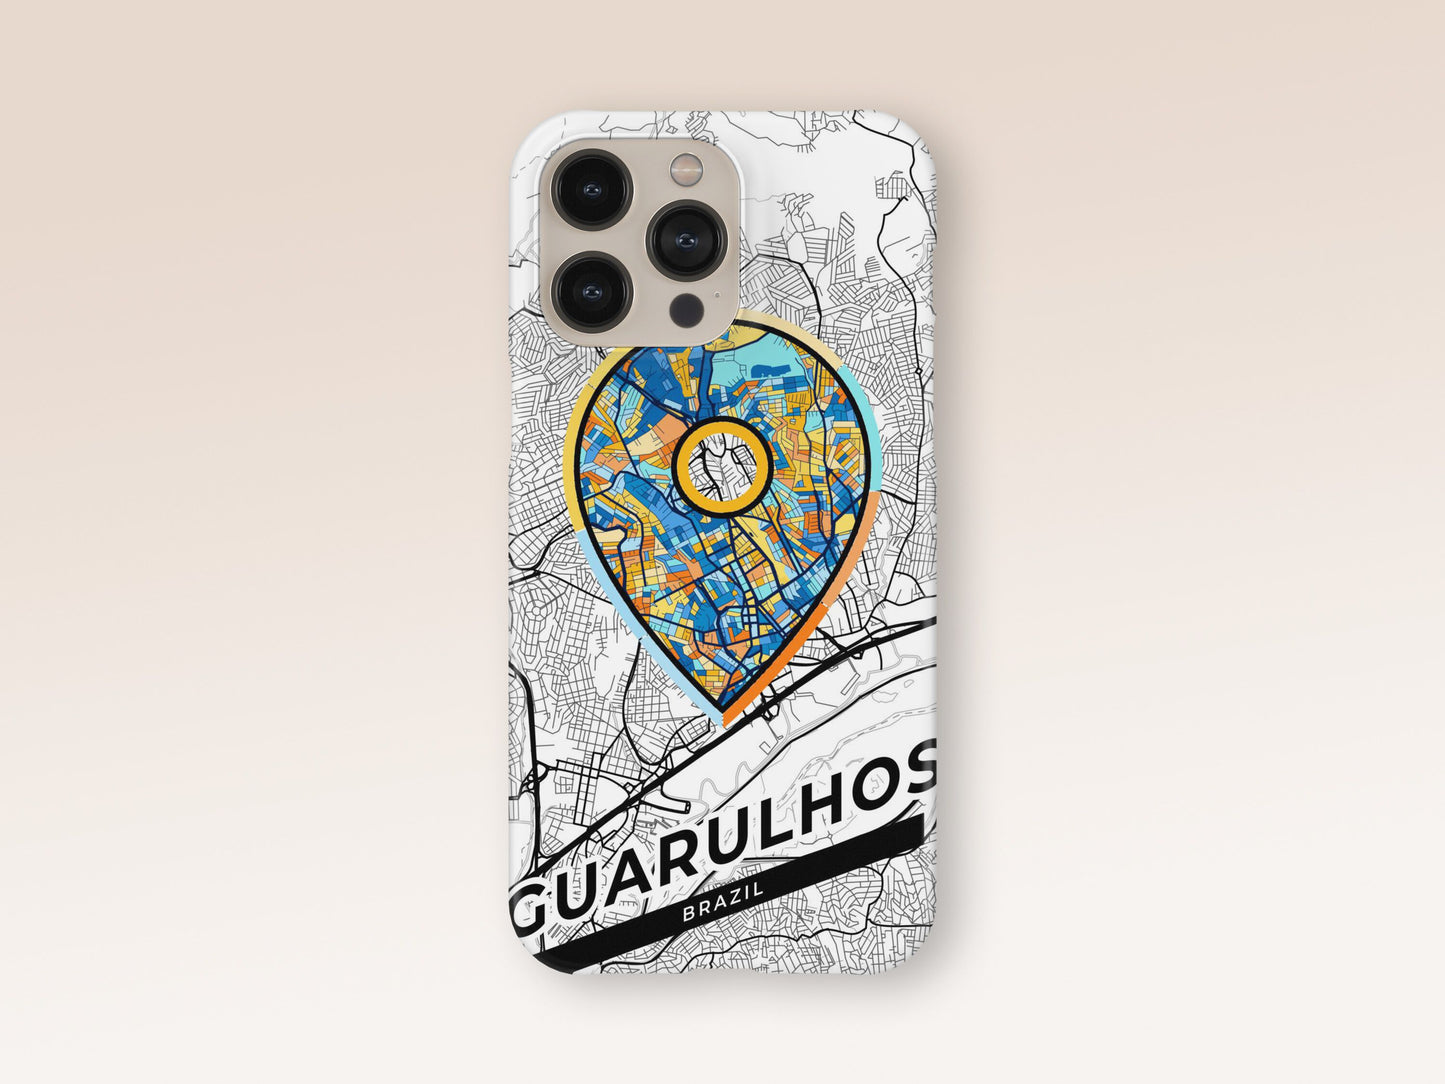 Guarulhos Brazil slim phone case with colorful icon. Birthday, wedding or housewarming gift. Couple match cases. 1